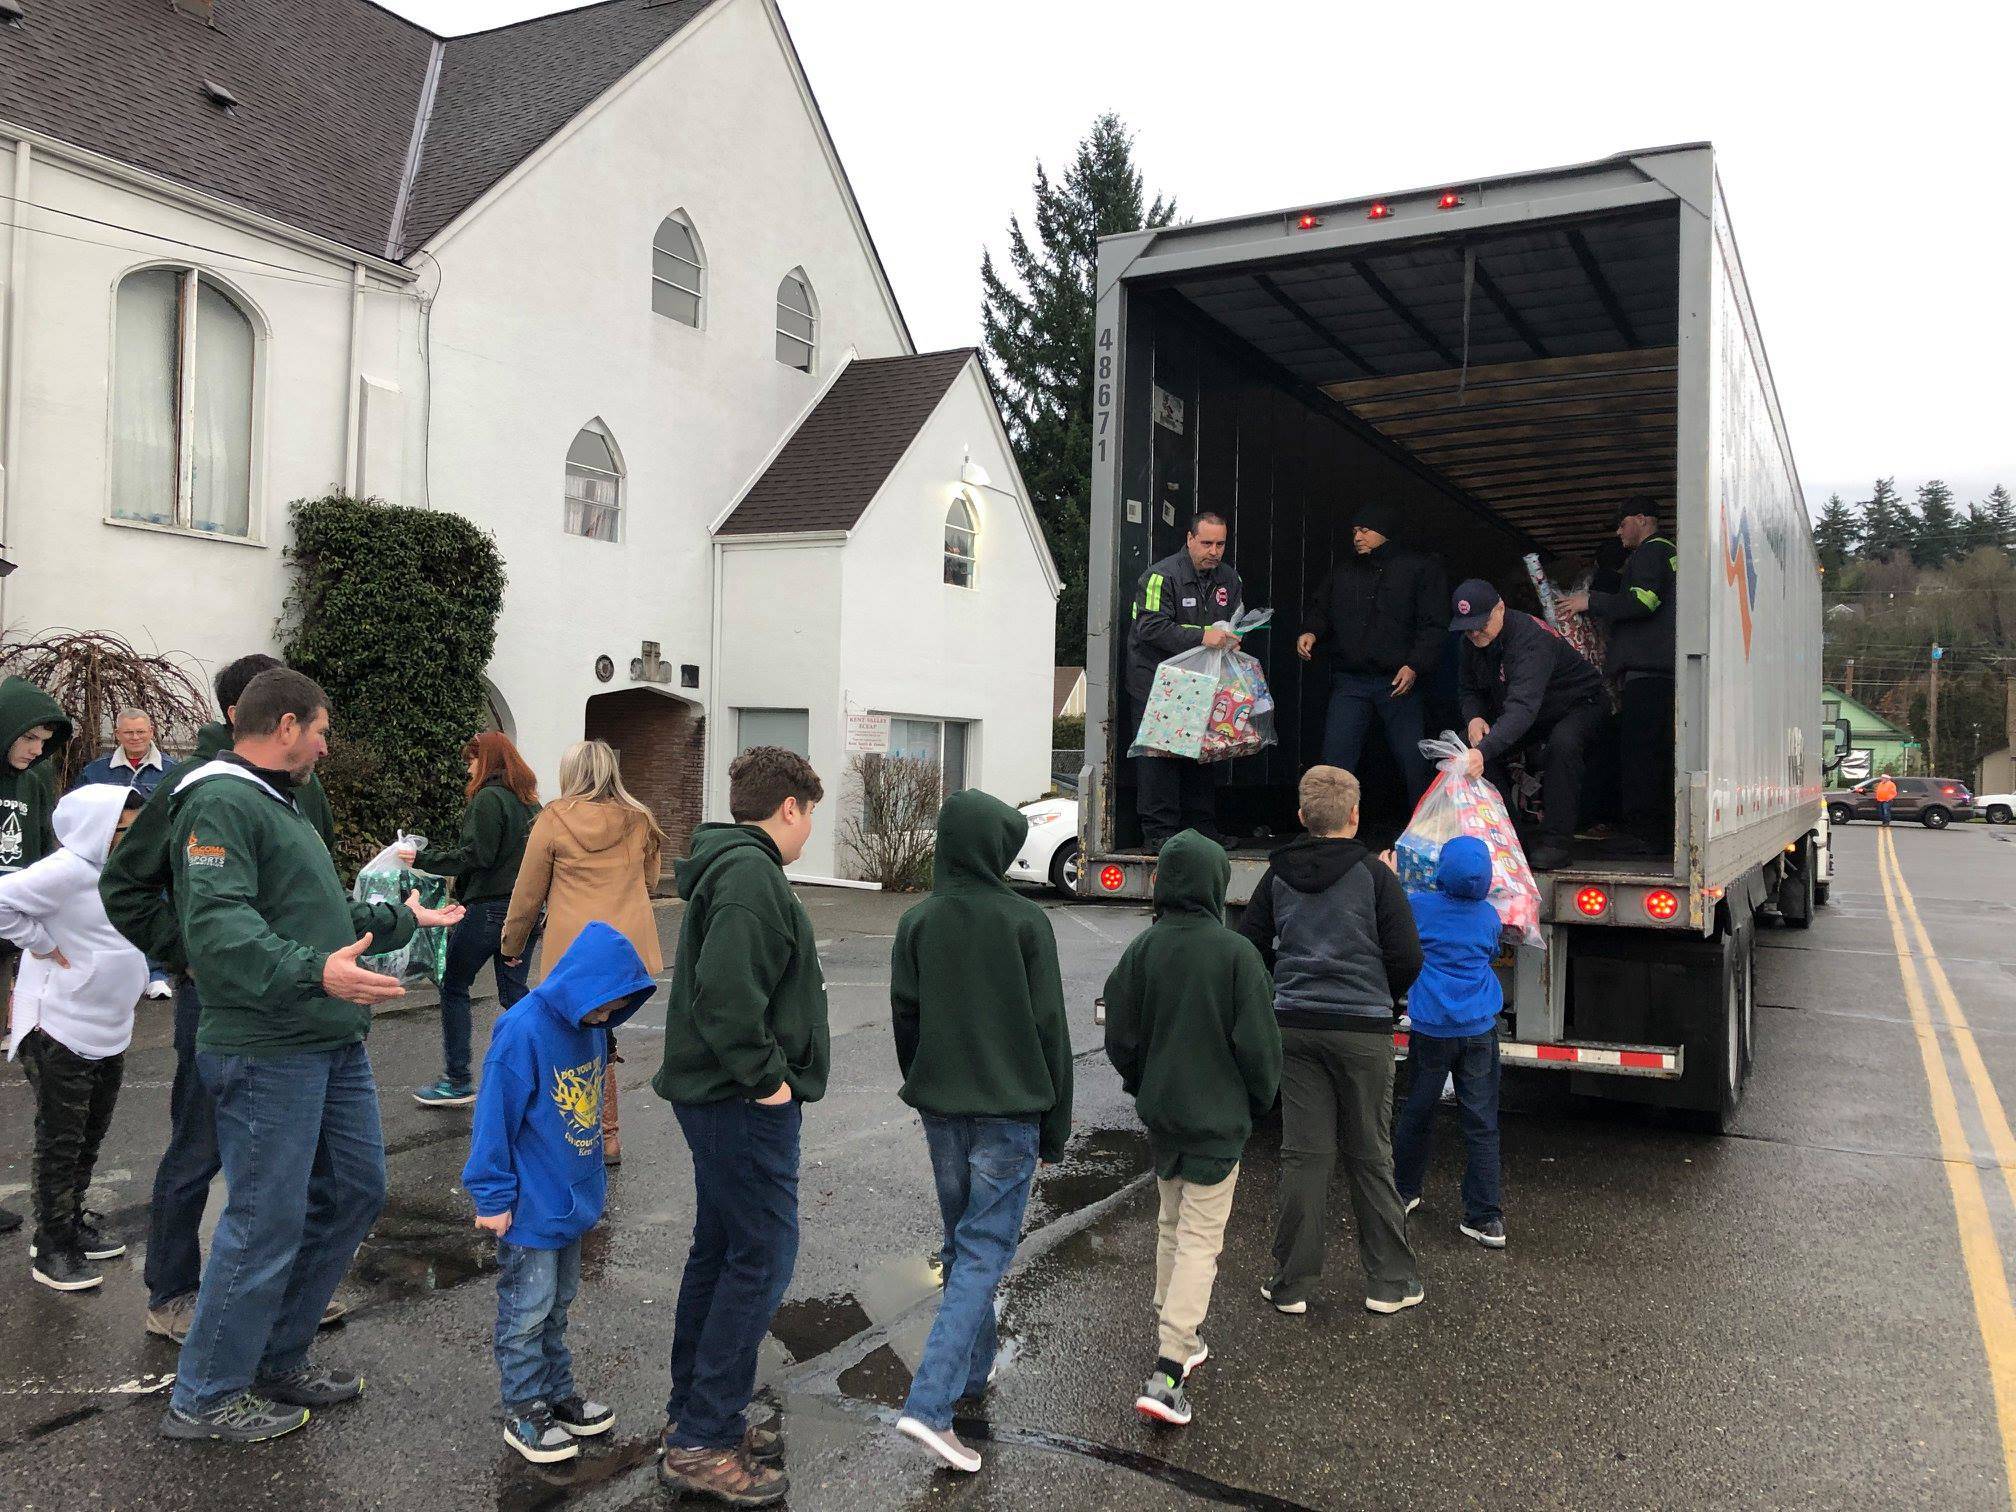 The Puget Sound Regional Fire Authority’s Toys for Joys program collected and delivered more than 5,000 toys for local children. COURTESY PHOTO